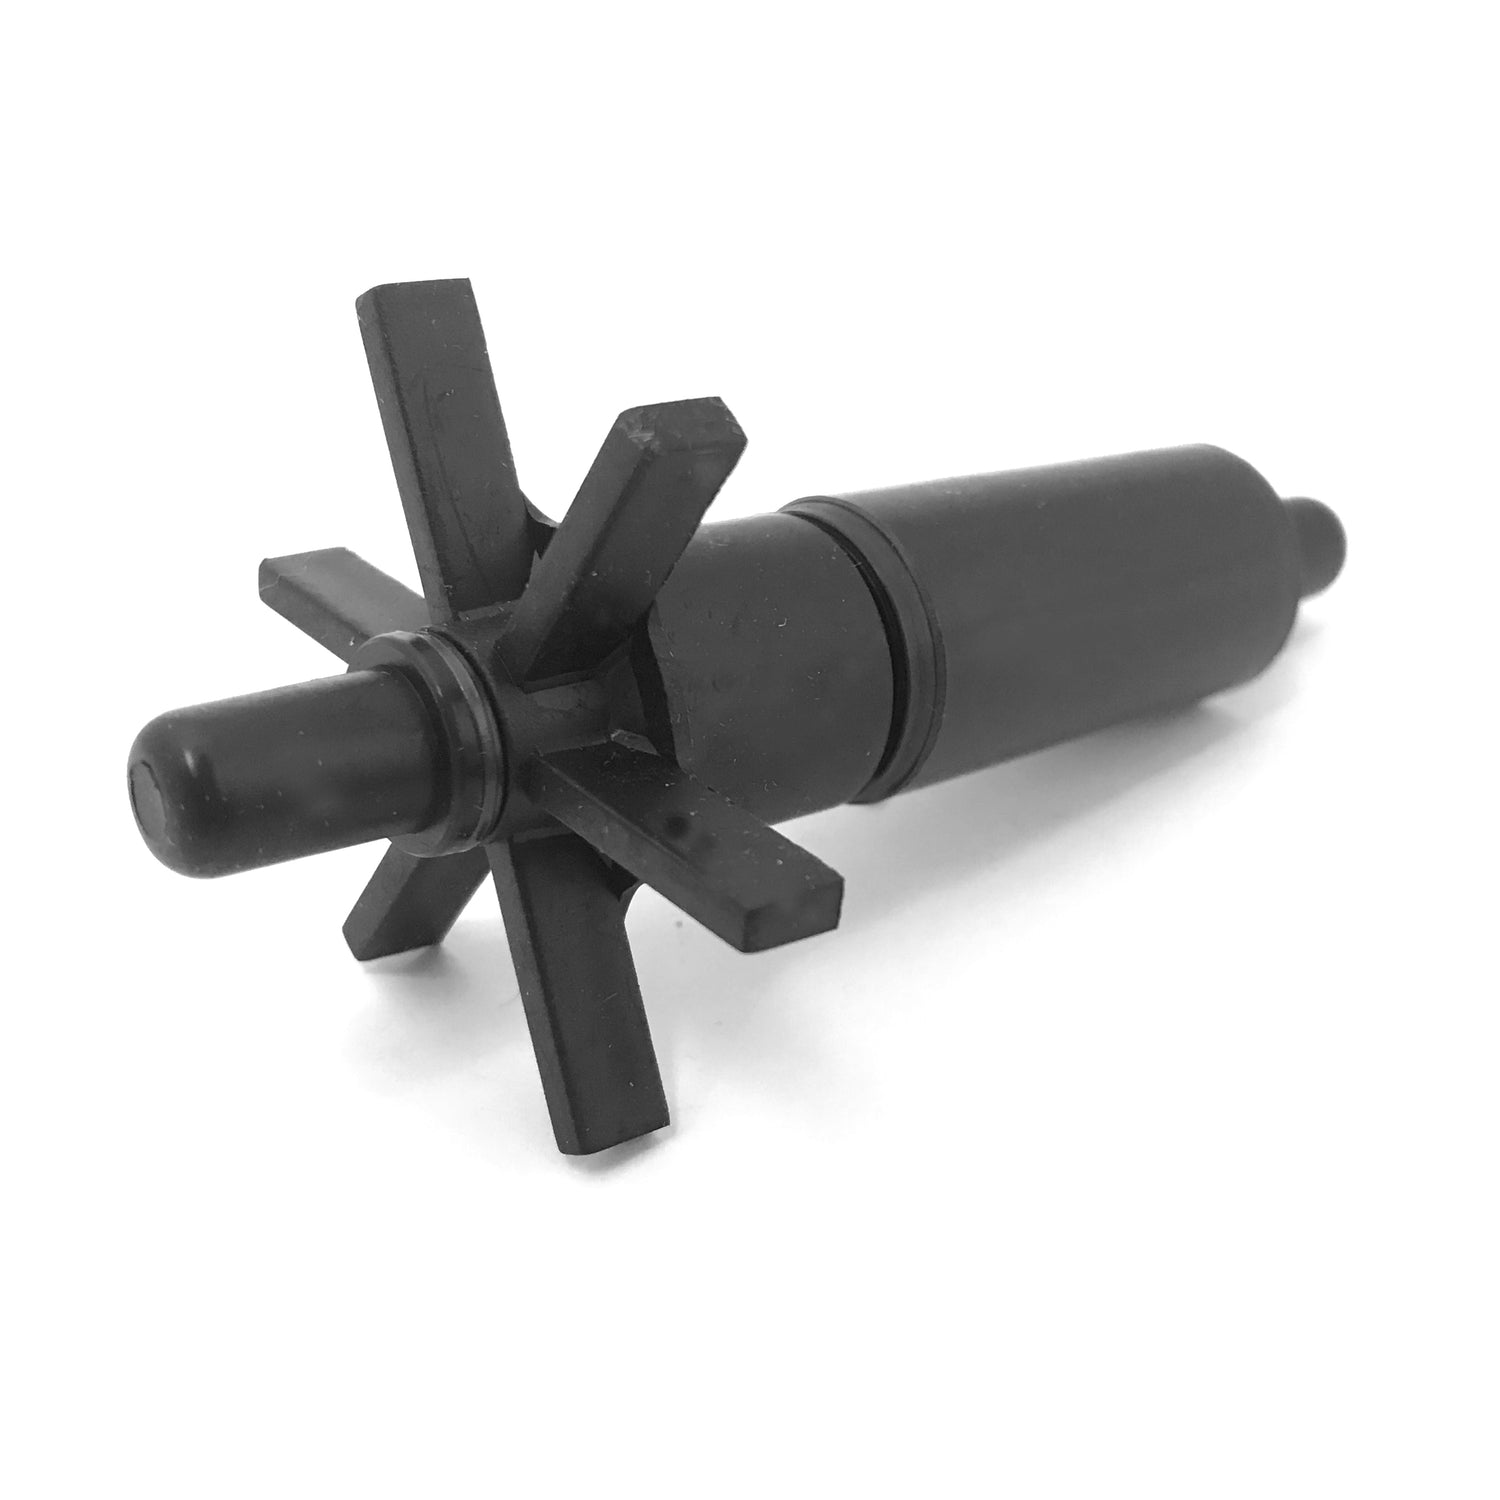 REPLACEMENT IMPELLER FOR SUPREME HYDRO-MAG RECIRCULATING WATER PUMP MODEL 9.5 WITH VENTURI